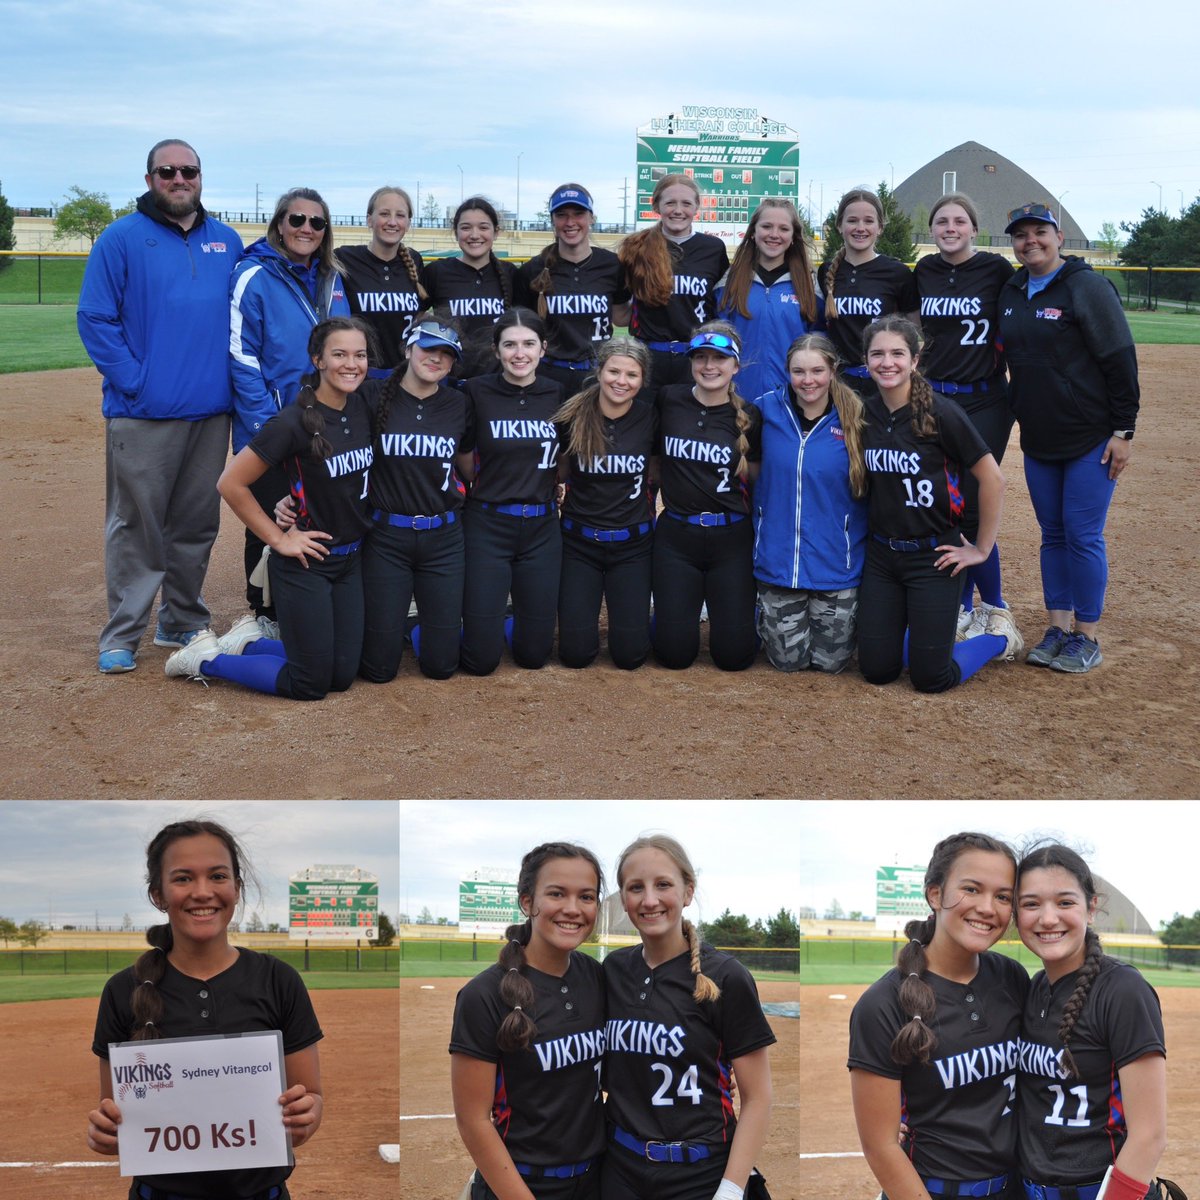 Threw my 3rd no-hitter of the season to help my @WiscoVikingSB team beat D2 #4 @IkeLions 3-0 and clinch a share of the @WOODLANDconf1 West for the 3rd consecutive year! Struck out 16 and had another immaculate inning, and I now have 710 high school career strikeouts!